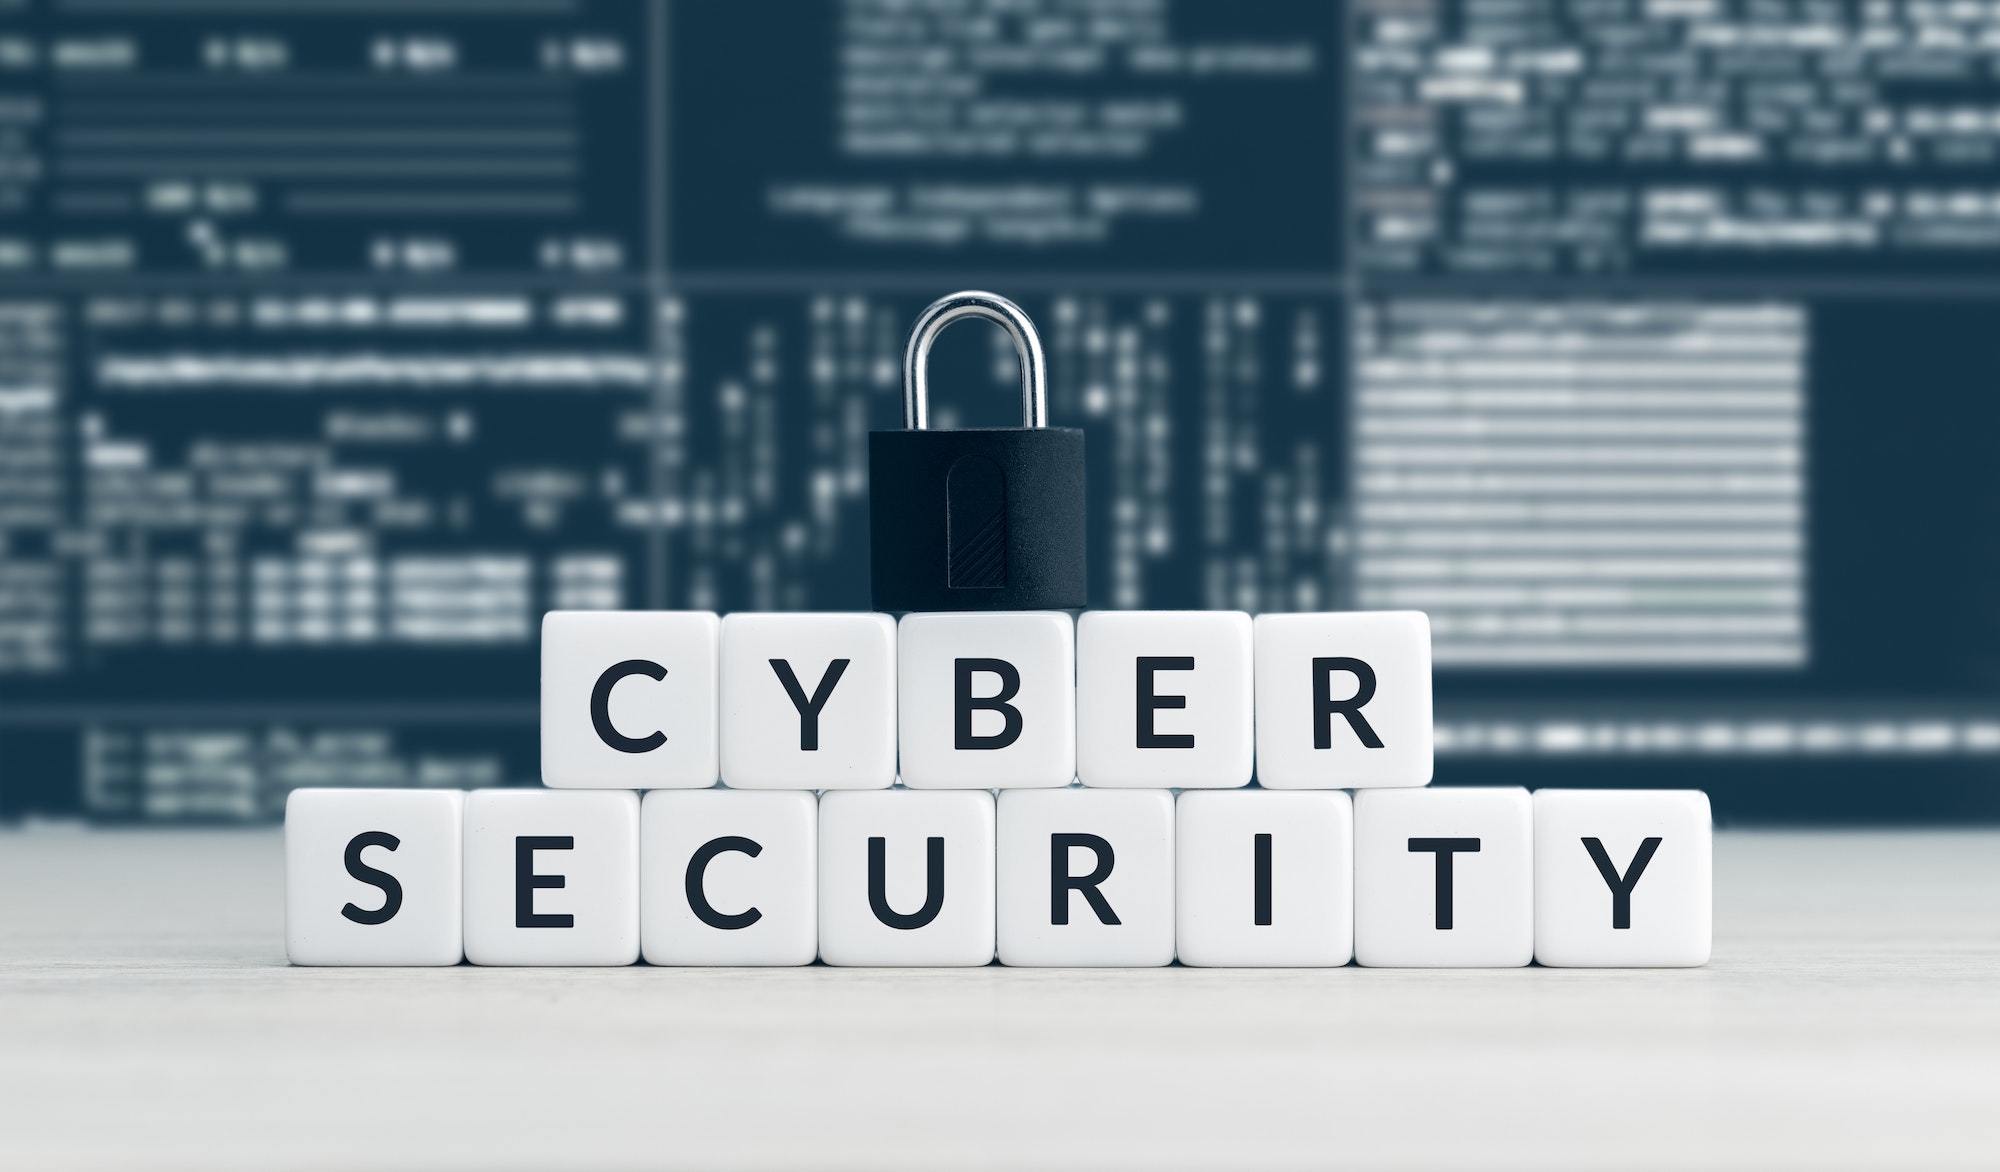 Cybersecurity: A Costly Annoyance or a Differentiating Competitive Advantage